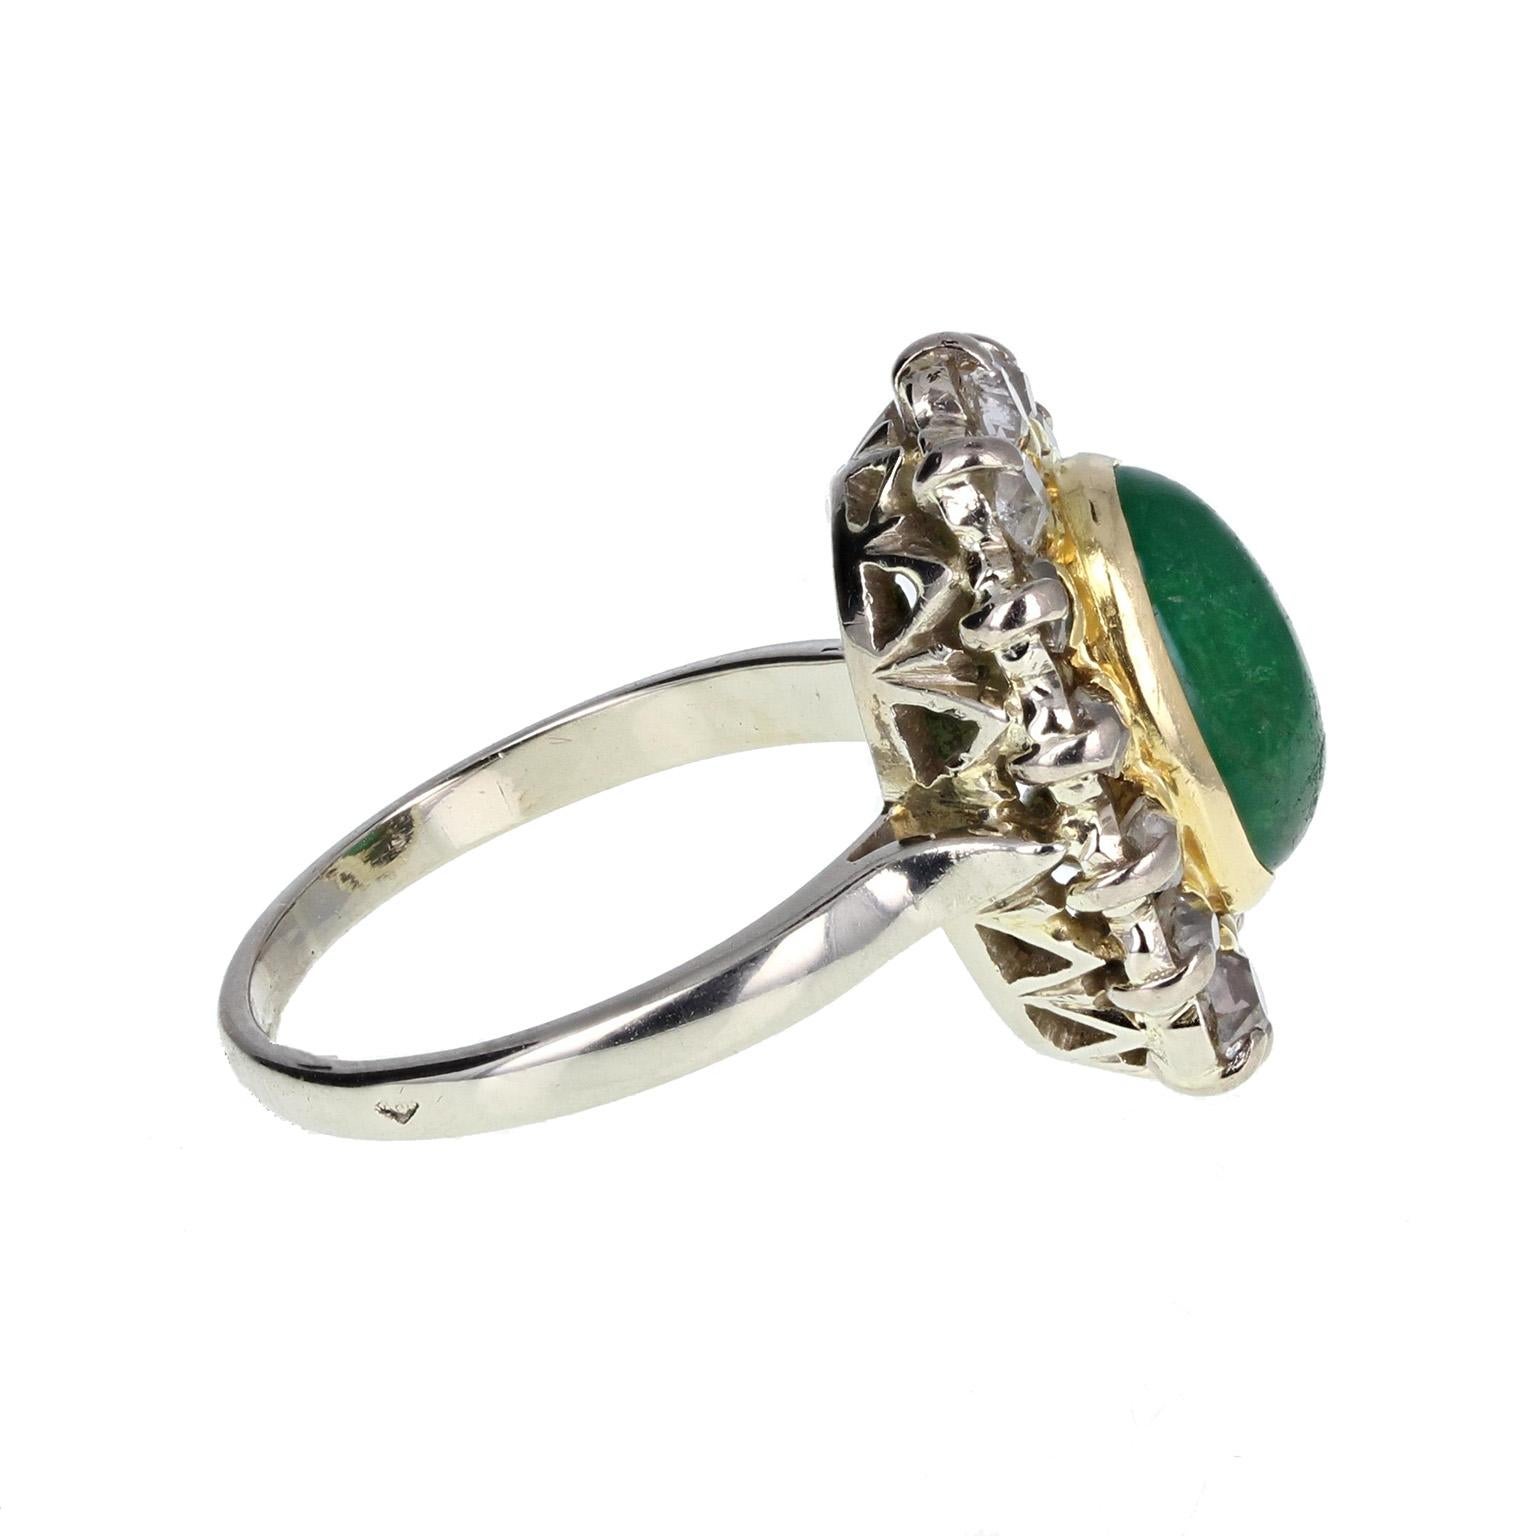 This wonderful 50's ring features a central oval emerald cabochon of deep green, surrounded in a golden, frilled frame and bordered with old mine-cut diamonds to form an oval cluster. Impressive and unusual. Shank and setting tests as 18 carat gold